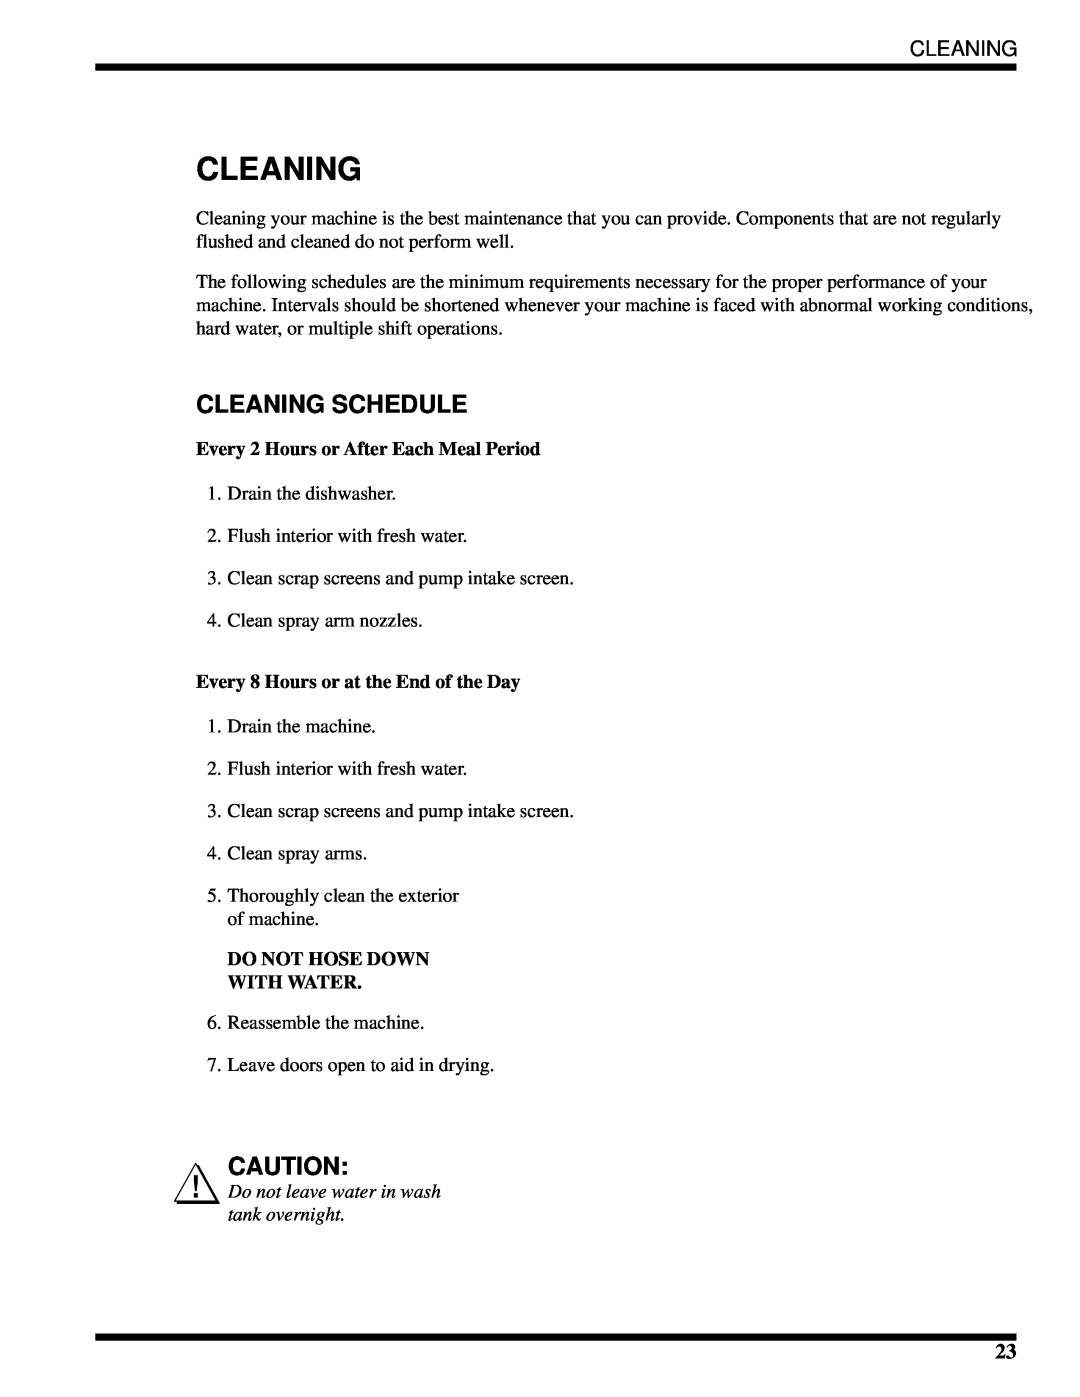 Moyer Diebel MH-60M2, MH-6NM2 Cleaning Schedule, Every 2 Hours or After Each Meal Period, Do Not Hose Down With Water 